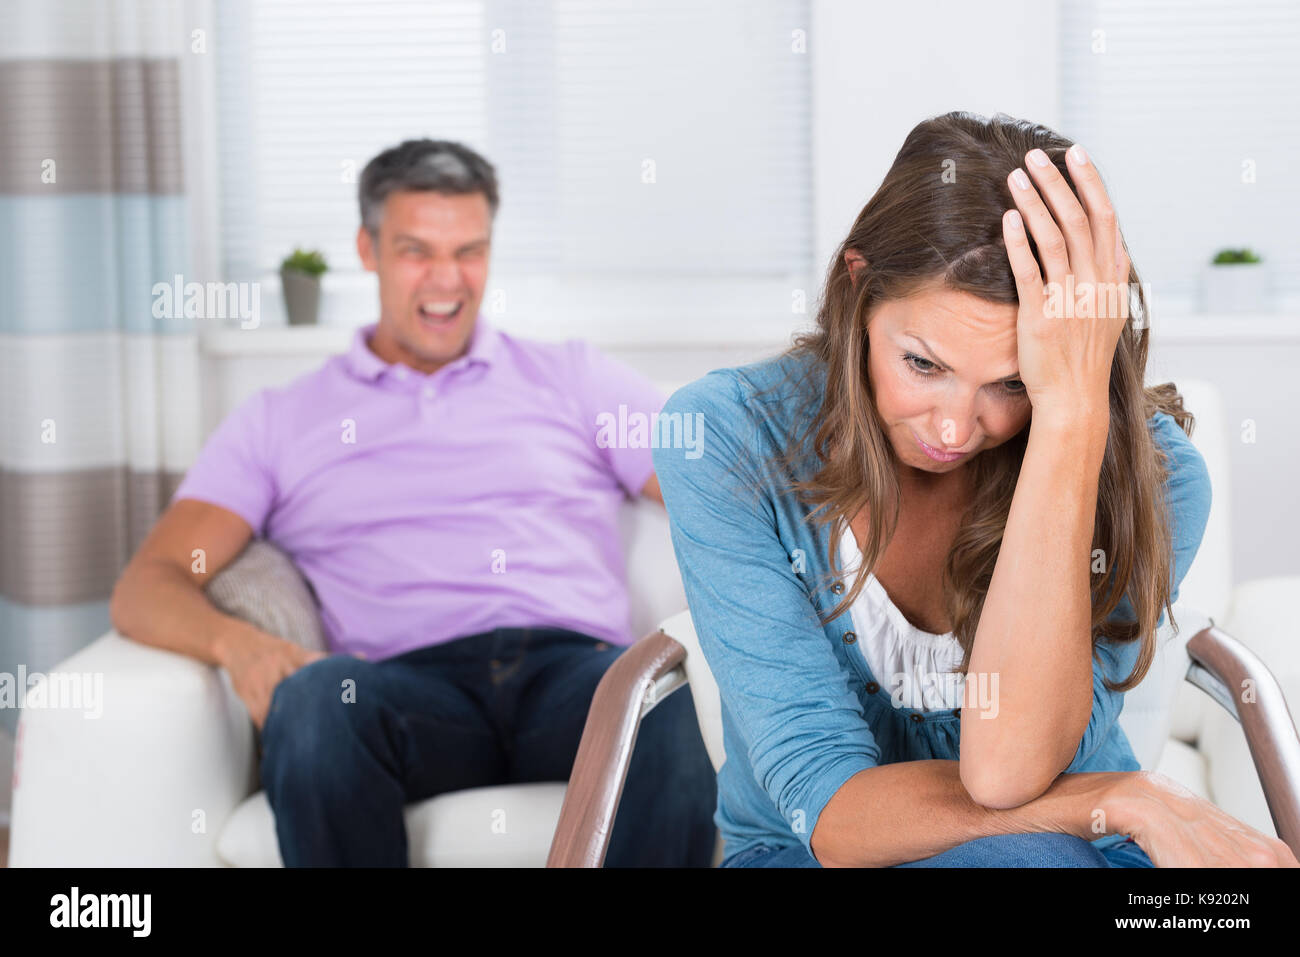 Mature Man Shouting To The Frustrated Woman Sitting On Chair Stock Photo